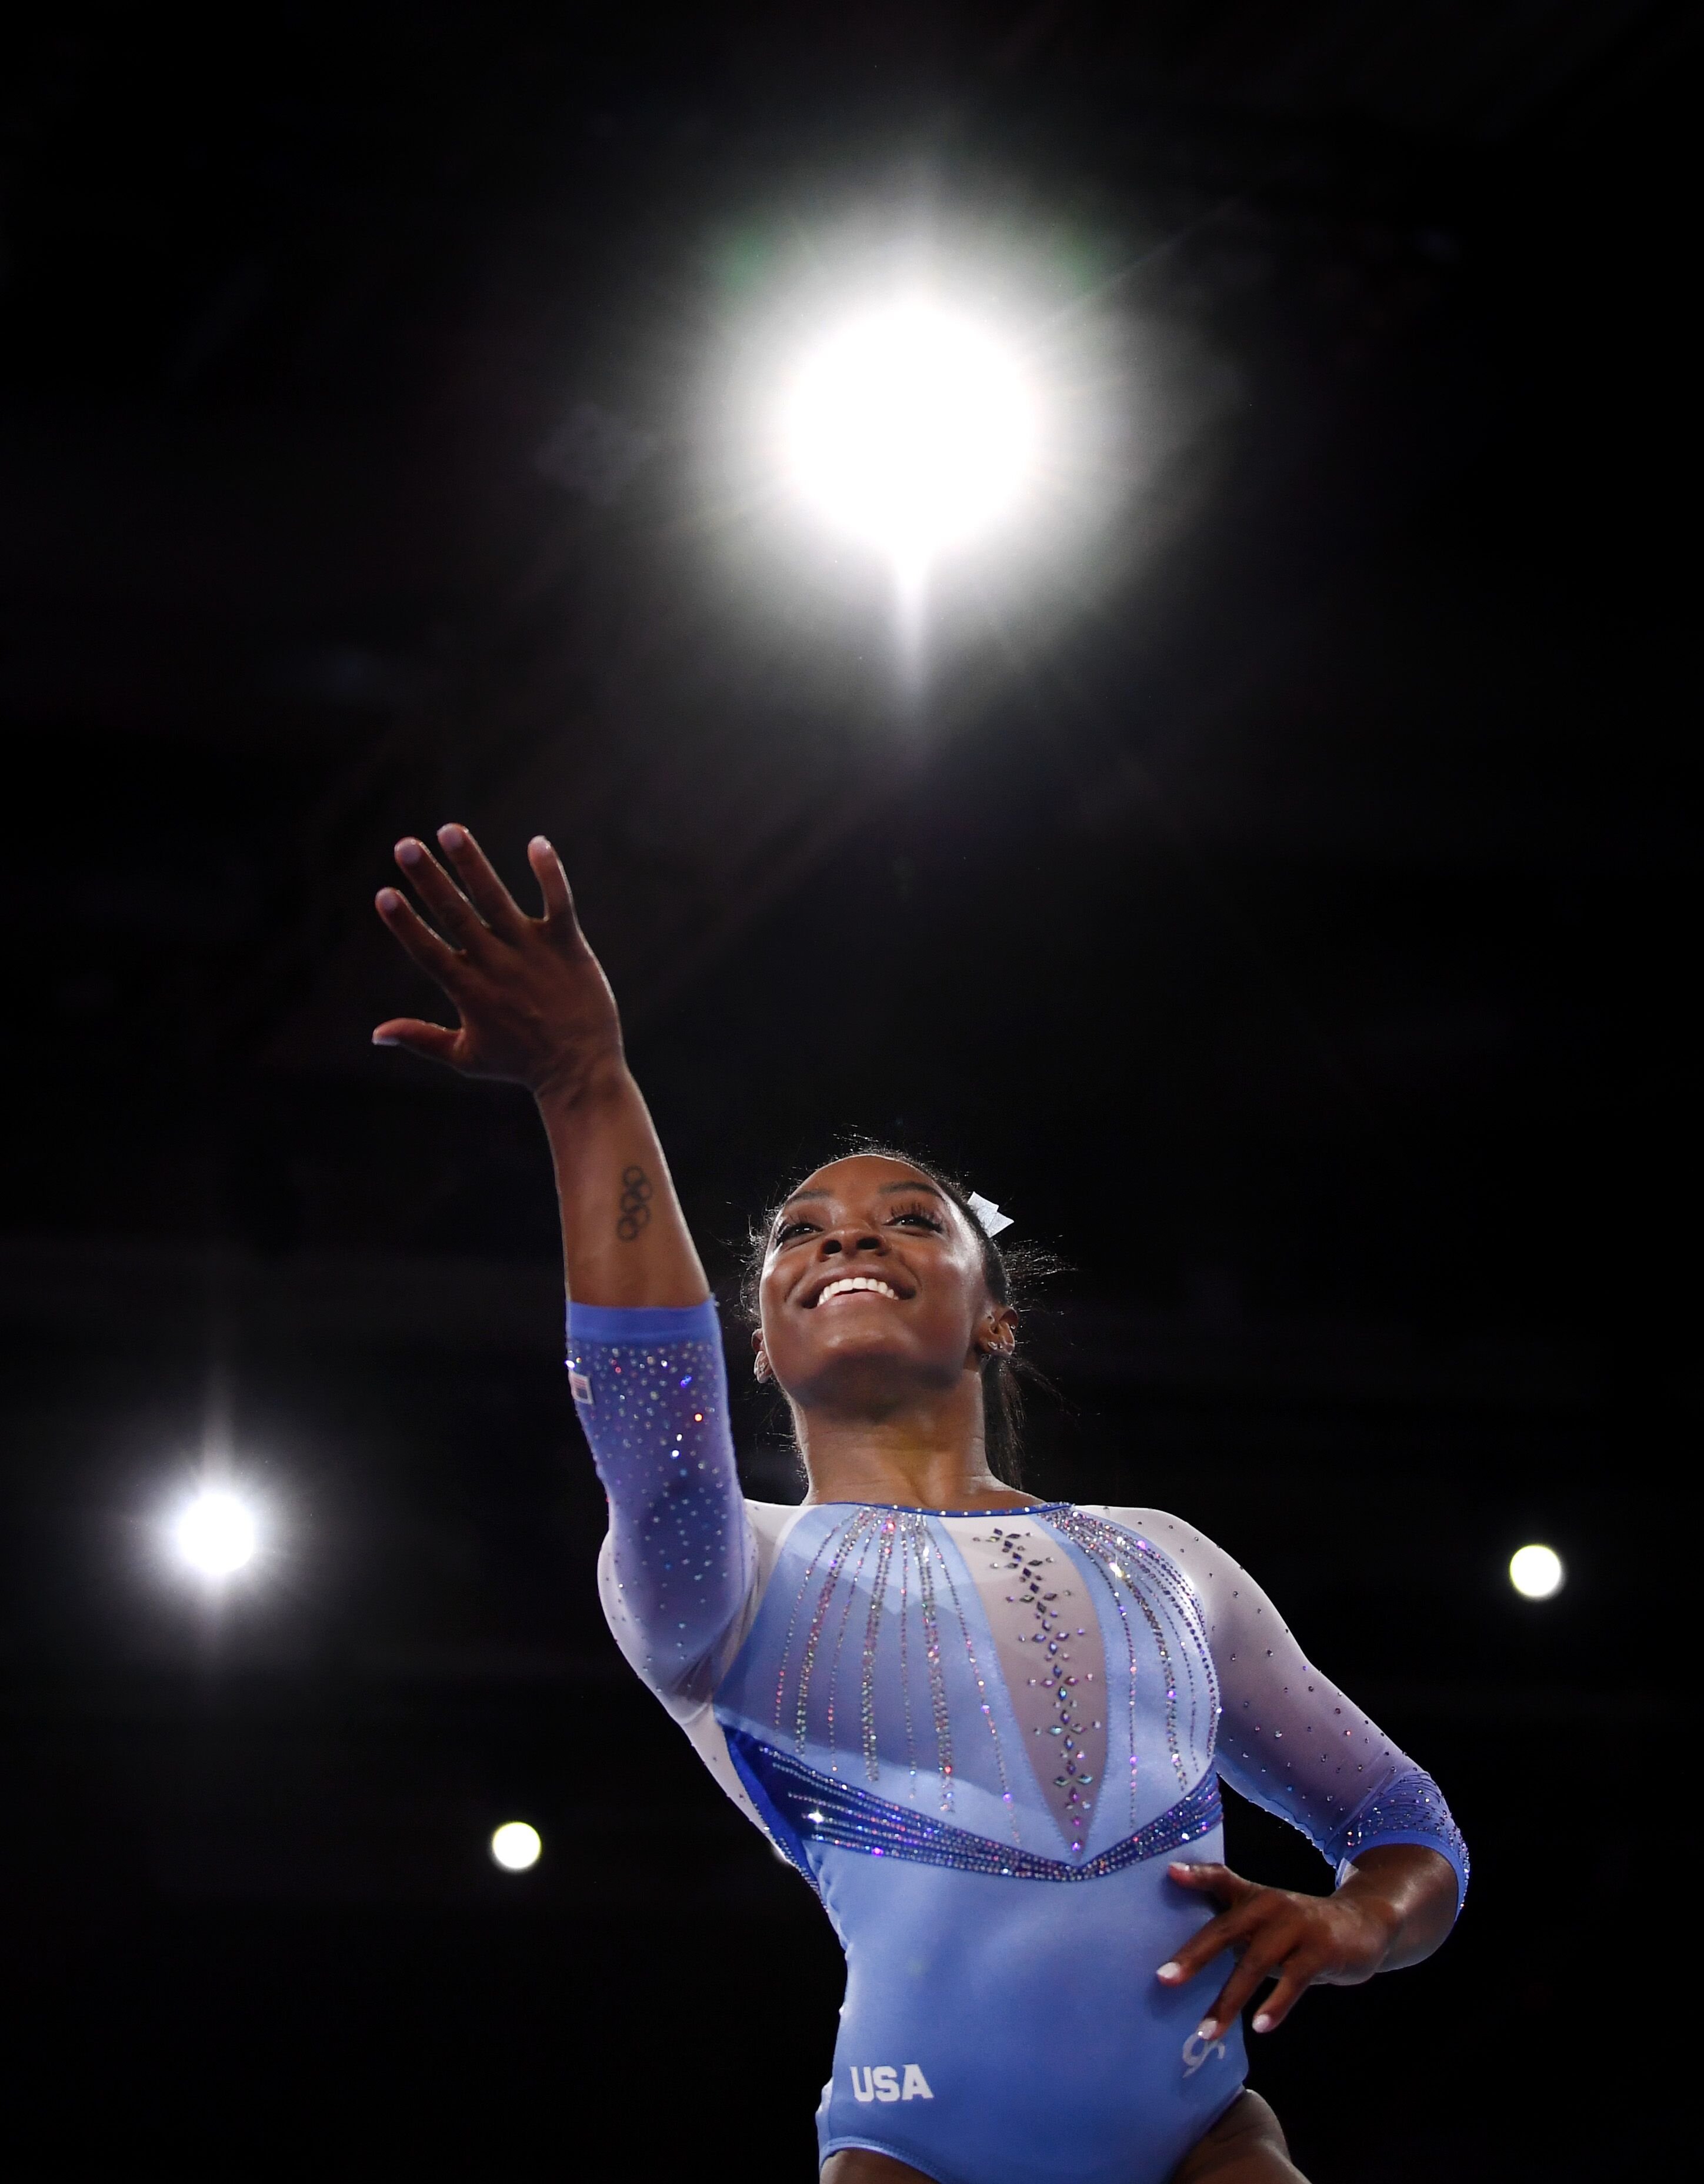 Simone Biles performing at the Stuttgard World Championship/ Source: Getty Images